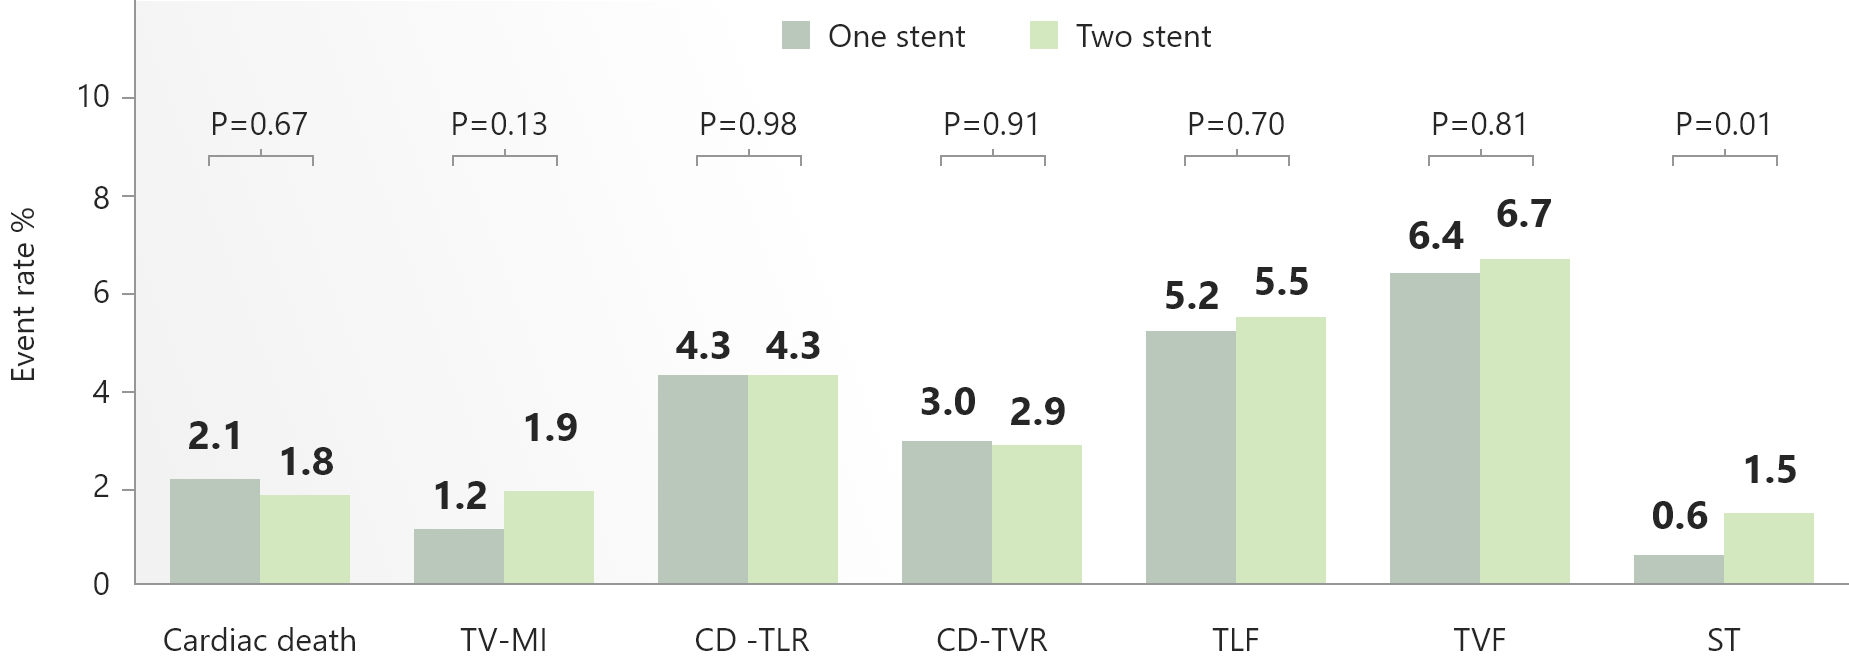 clinical_evidence_e_ultimaster_bifurcation_one_vs_two_stent.png